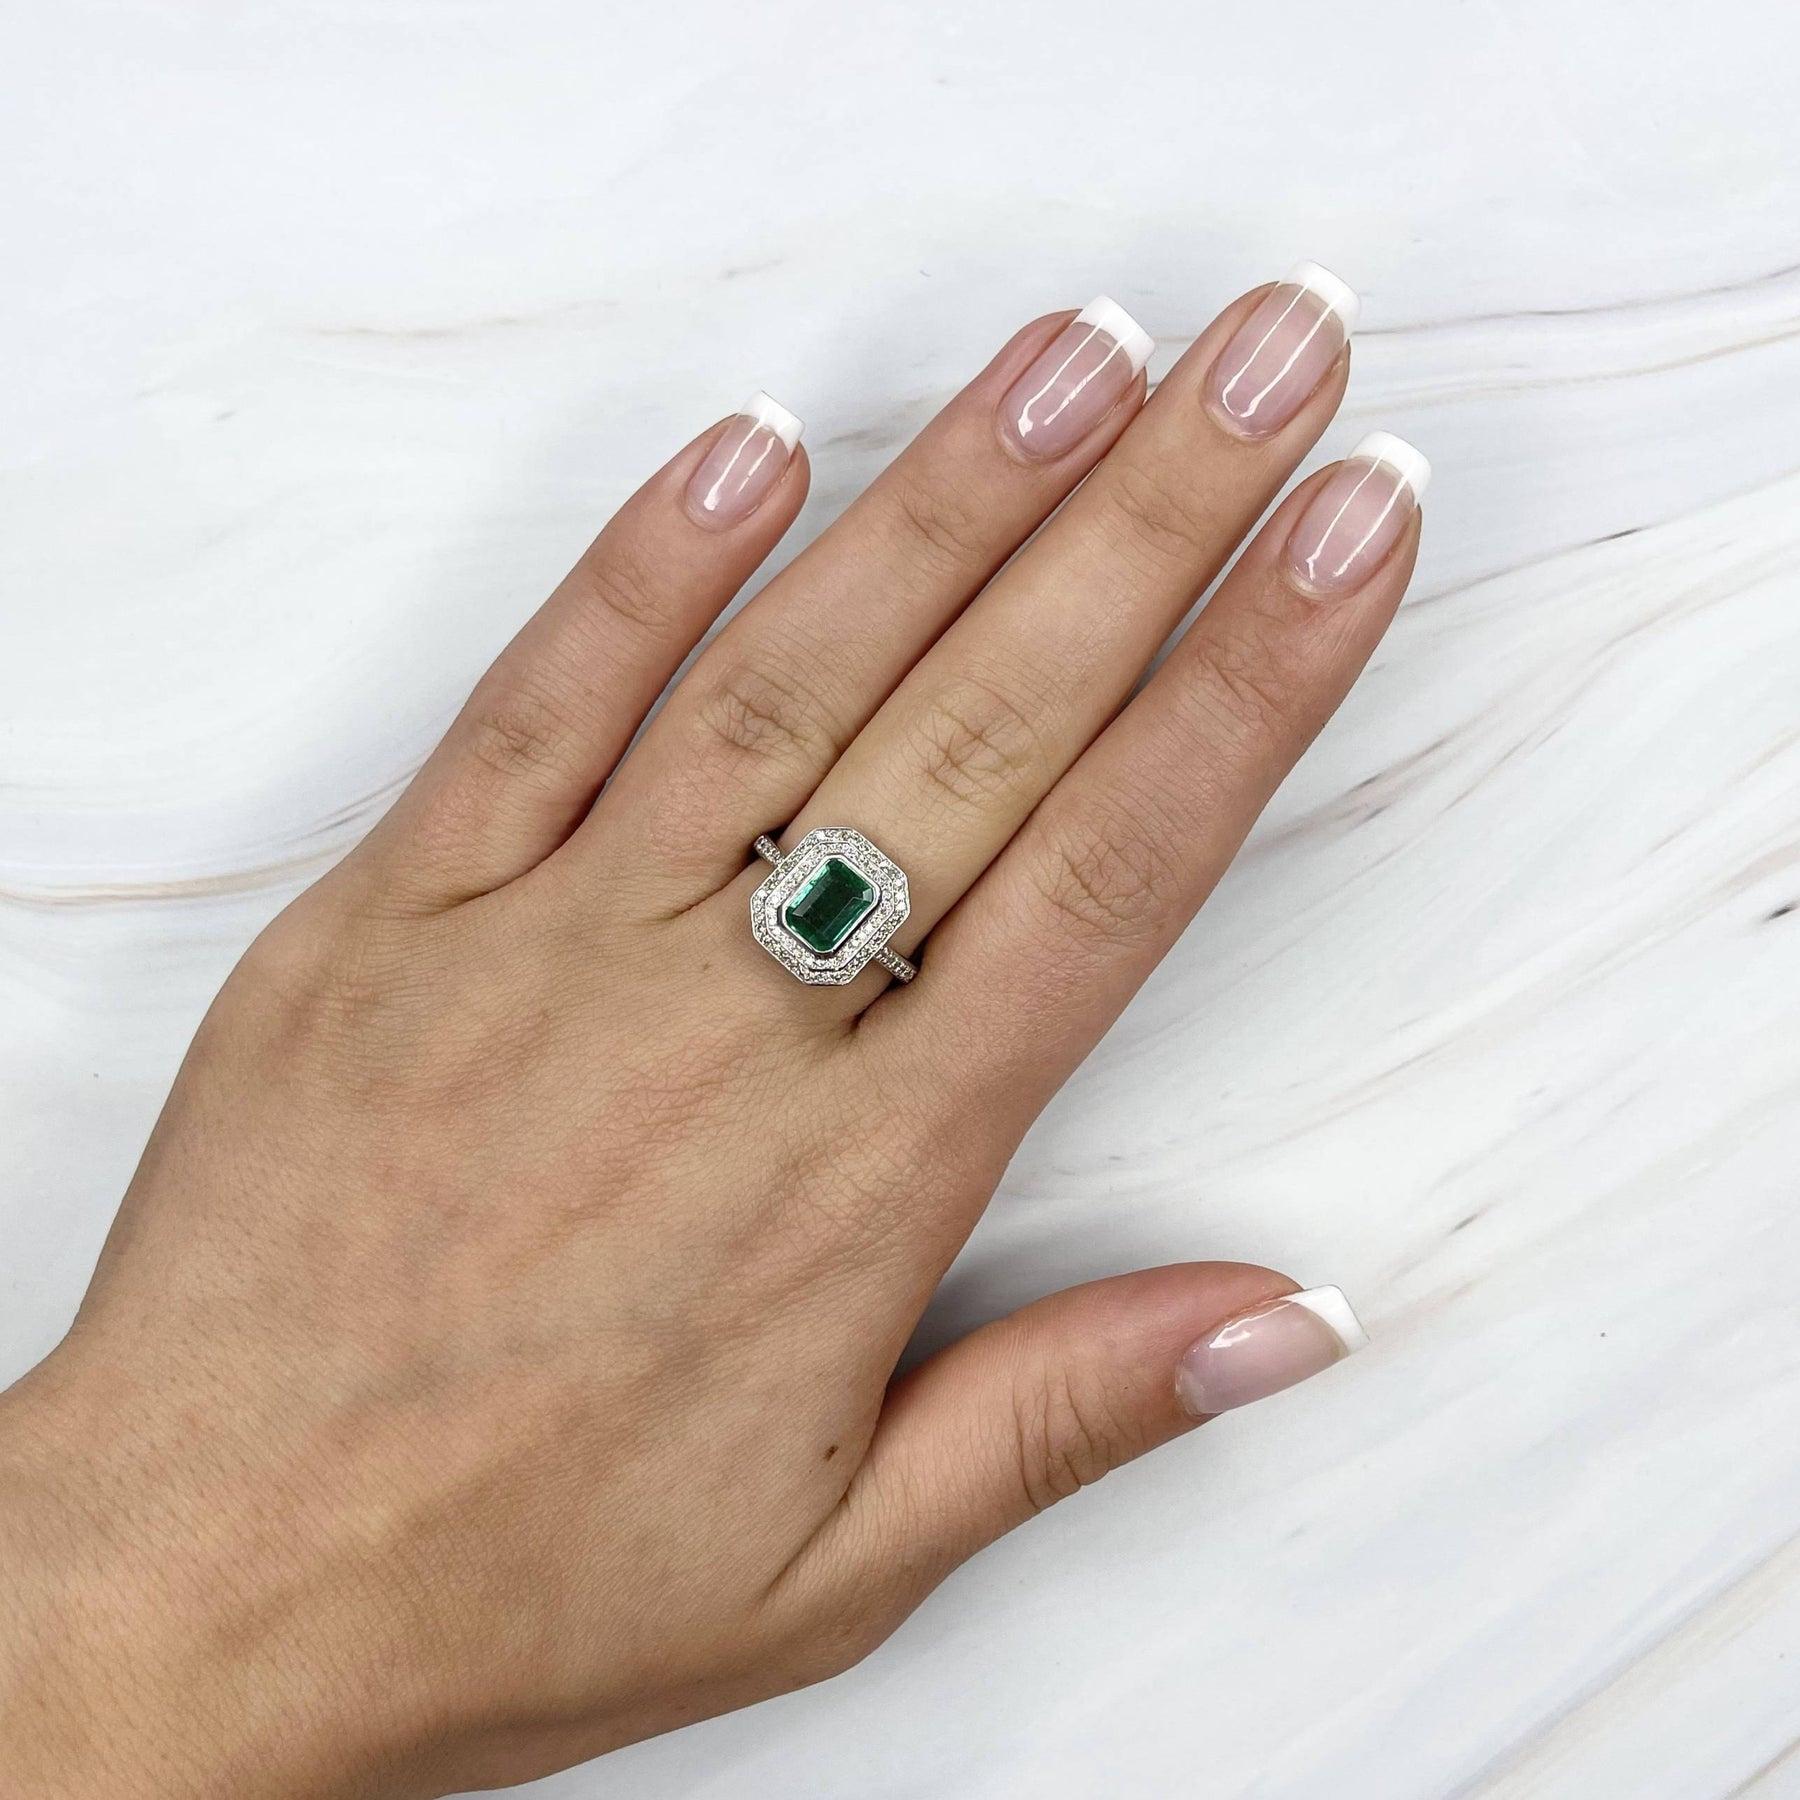 For Sale:  18ct White Gold Ring with 1.39ct Emerald and Diamond Ring 2